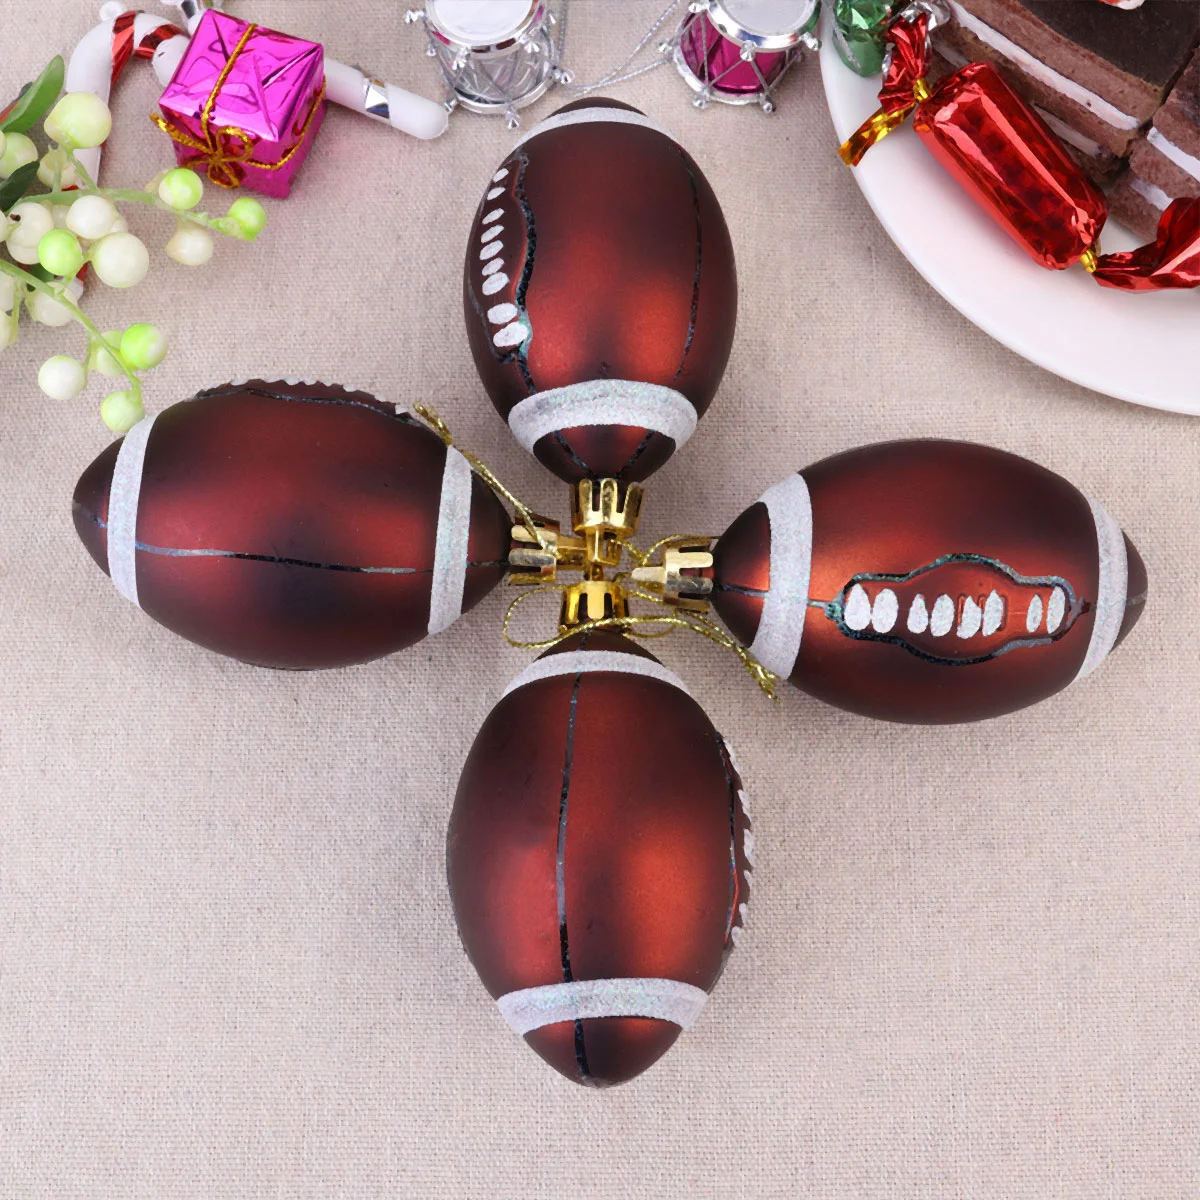 Christmas Tree Ornaments Hanging Basketball Decorations Ornament Sports Party Shatterproof Decoration Baubles Football Baseball christmas baubles ornaments tree hanging shatterproof colorful christmas ball ornaments for xmas new year home party decoration